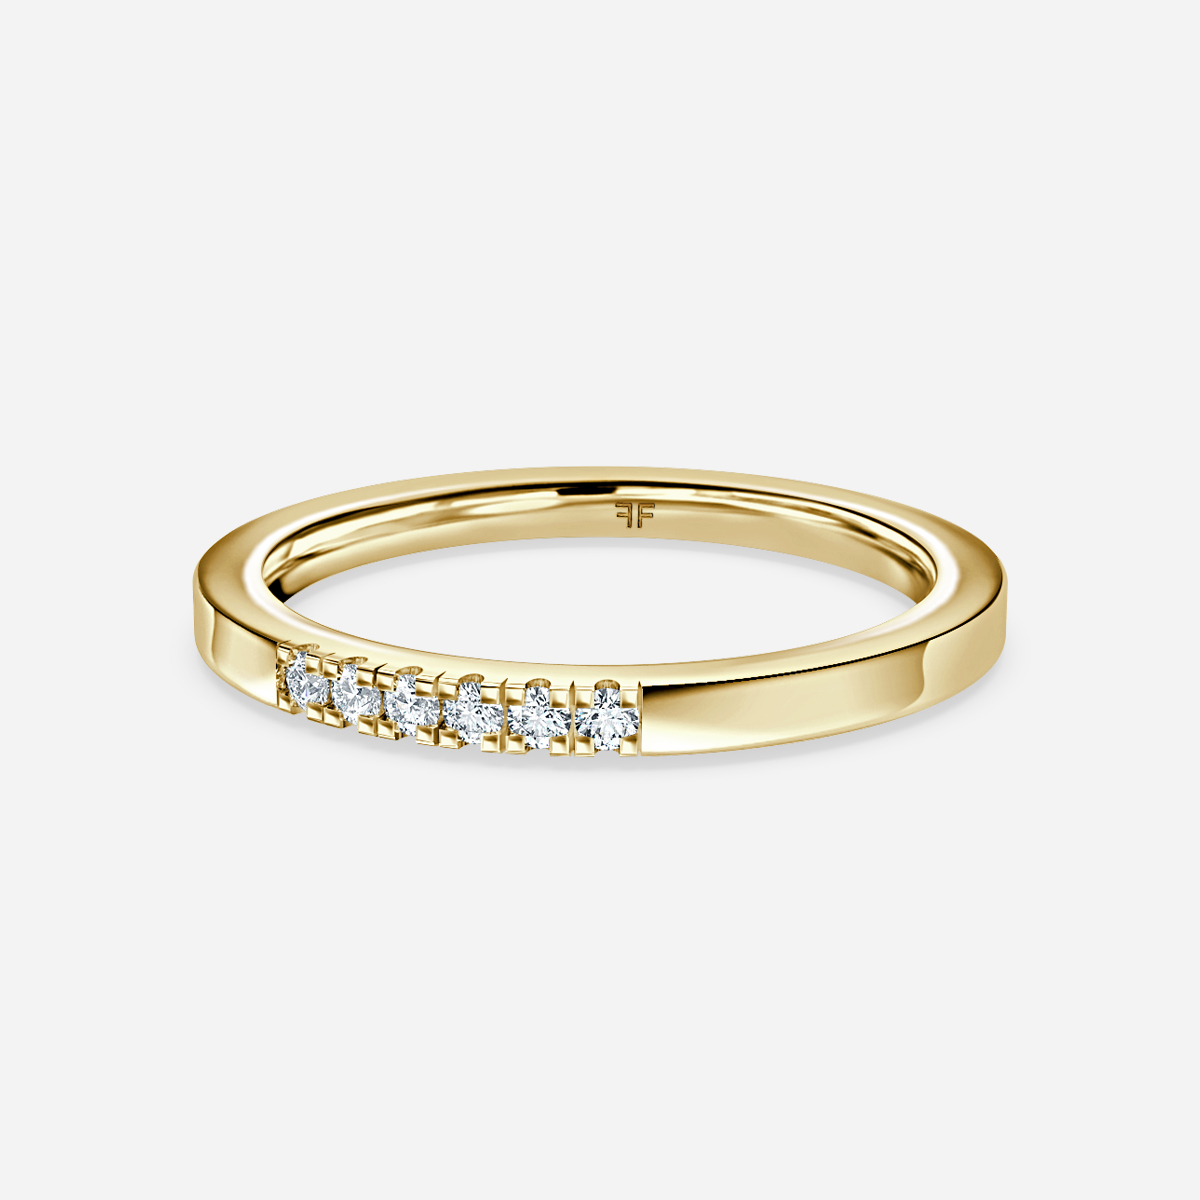 Pave Diamond Wedding Ring In Yellow Gold